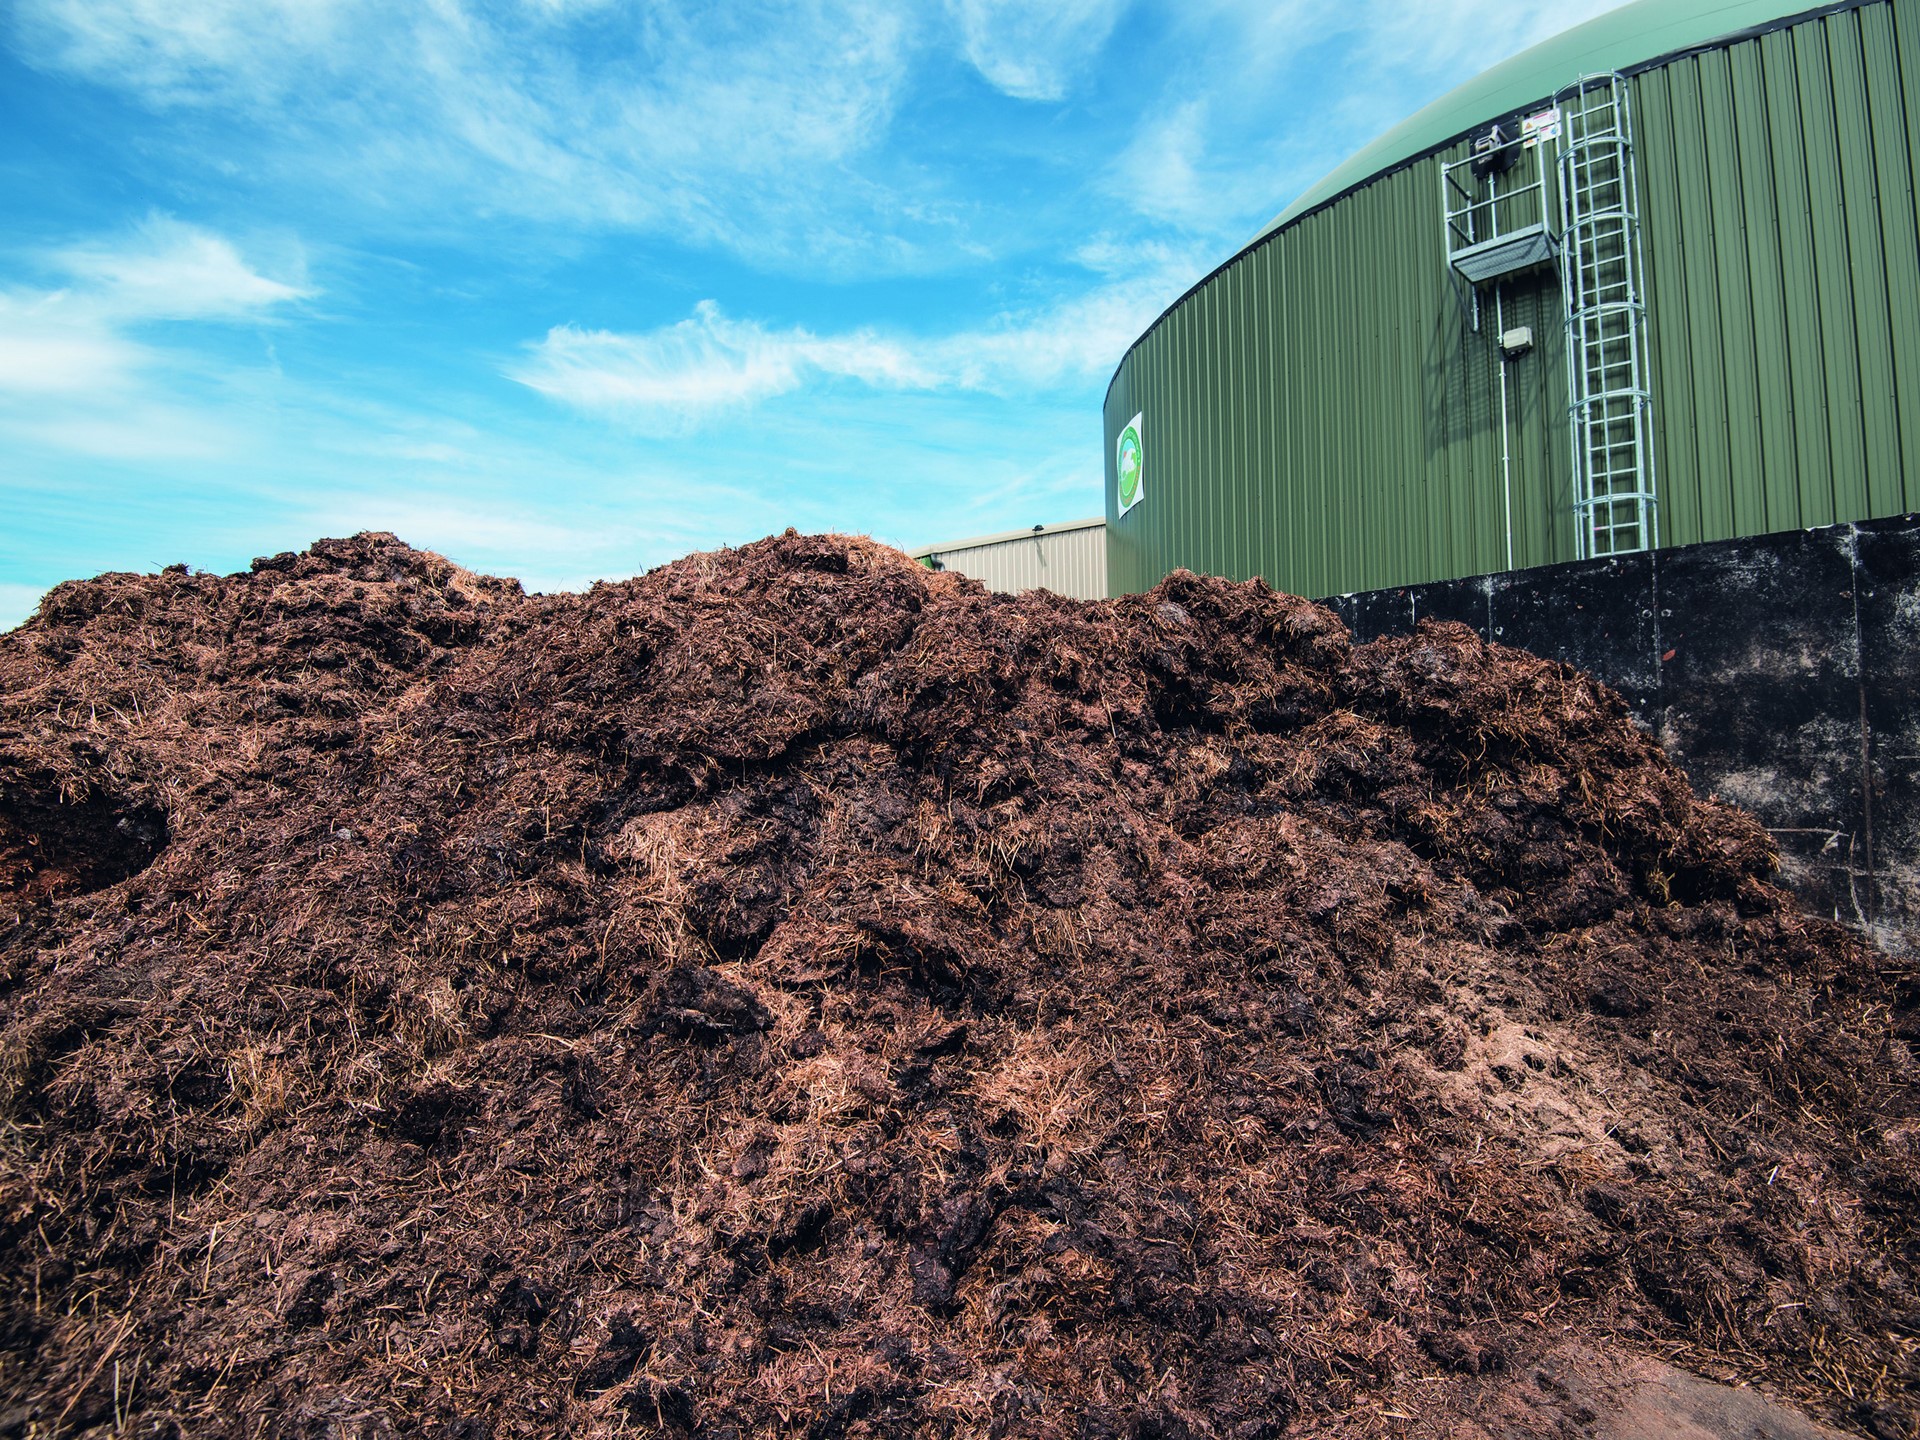 Animal waste can be repurposed and fed into the biodigester to generate  biogas